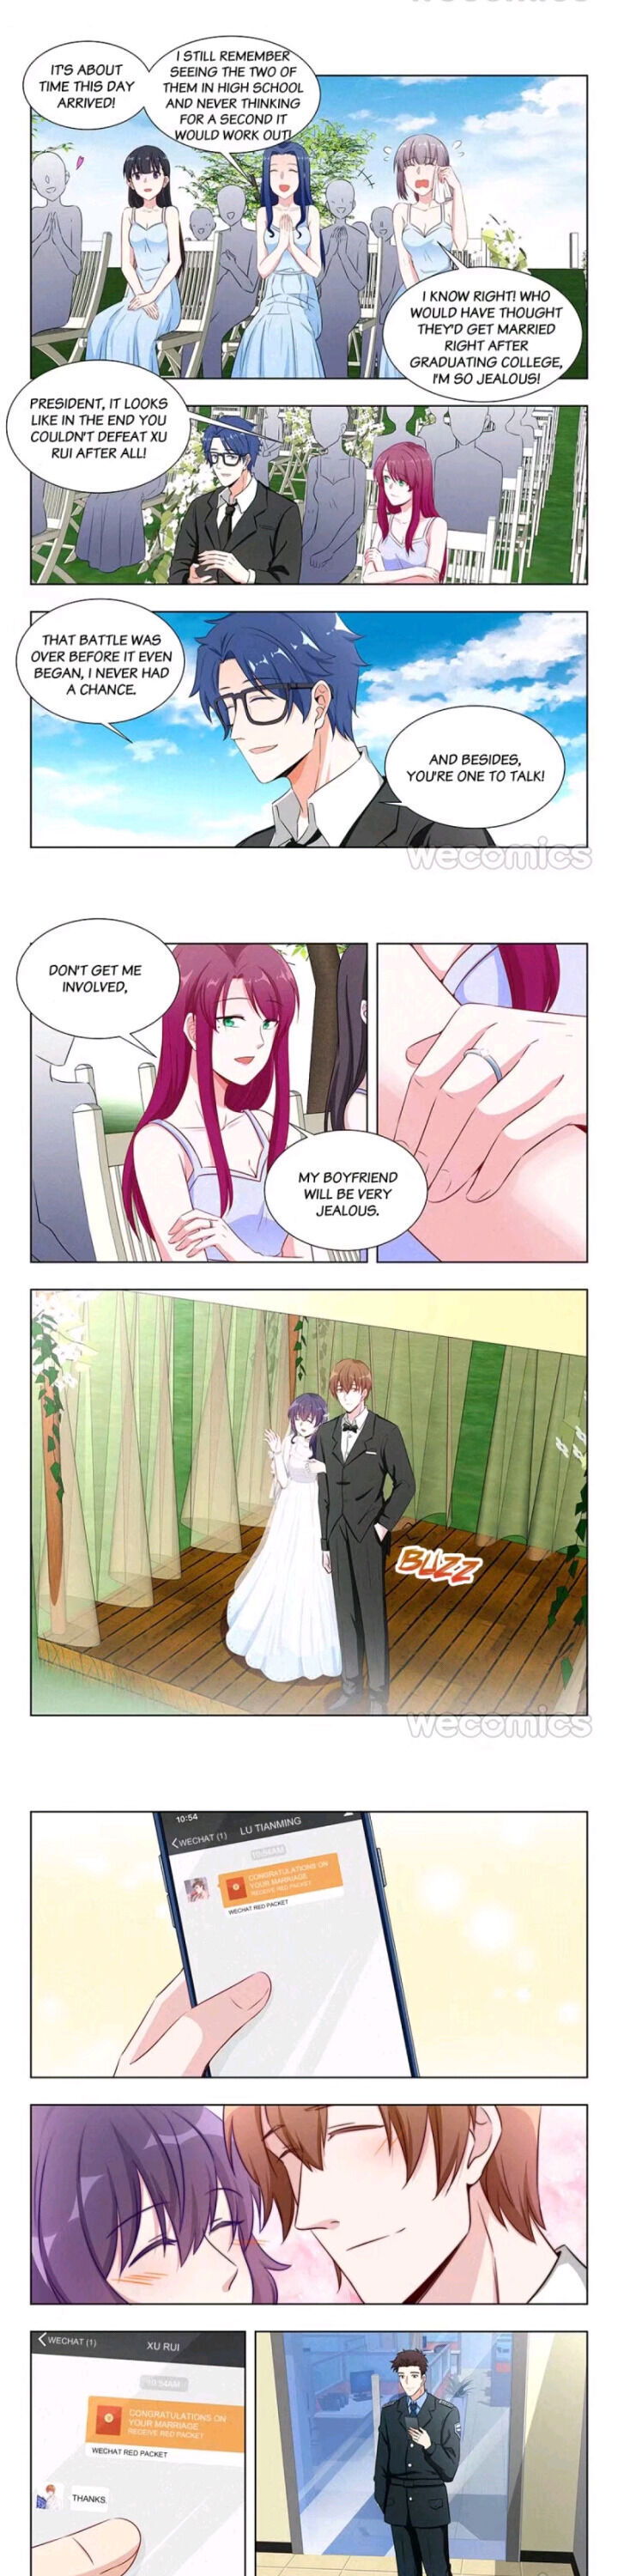 Halfway in Love Chapter 87 - End page 2